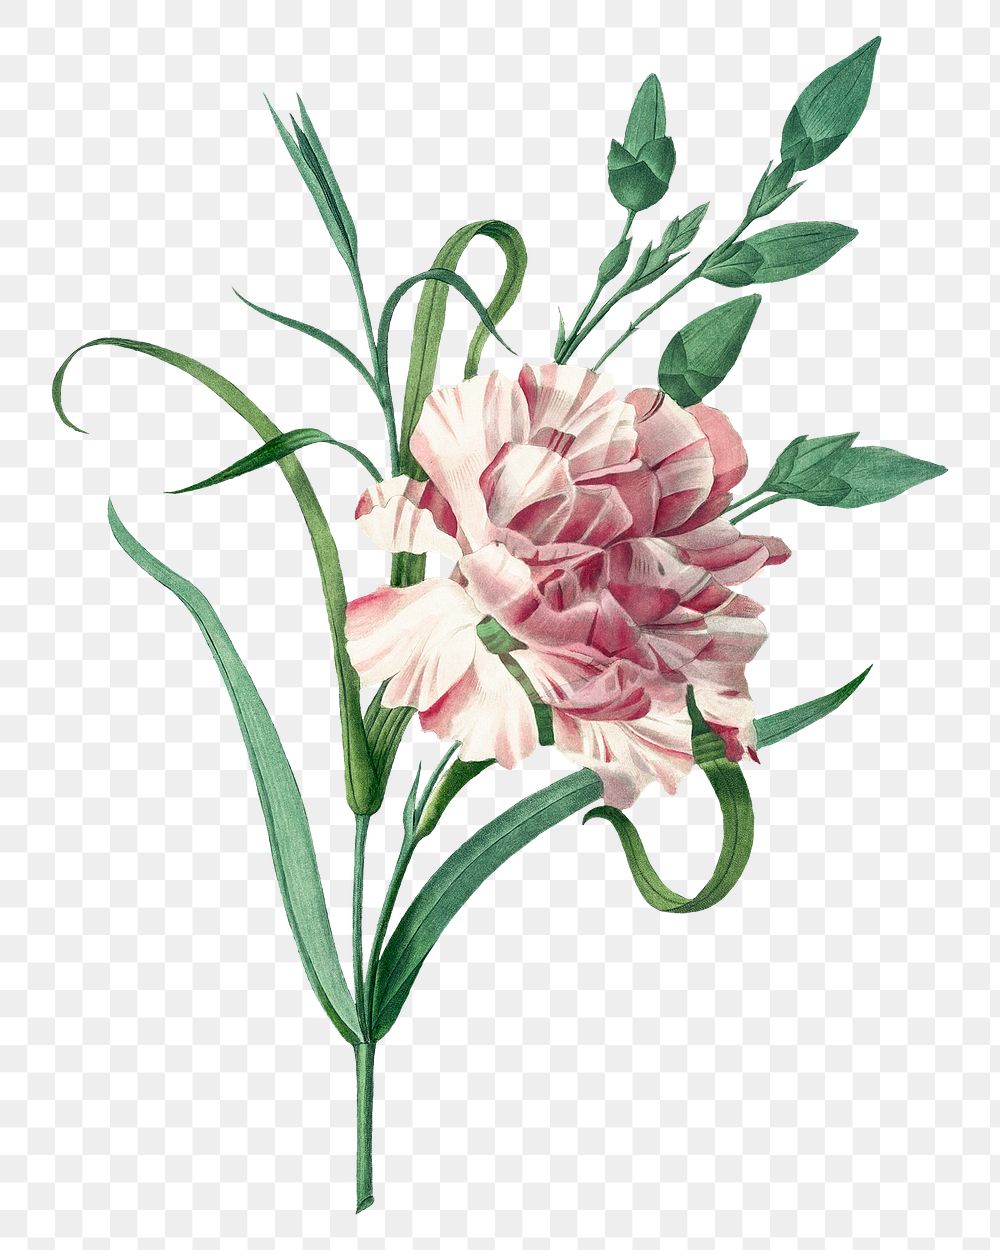 Png botanical Carnation flower illustration, remixed from artworks by Pierre-Joseph Redout&eacute;